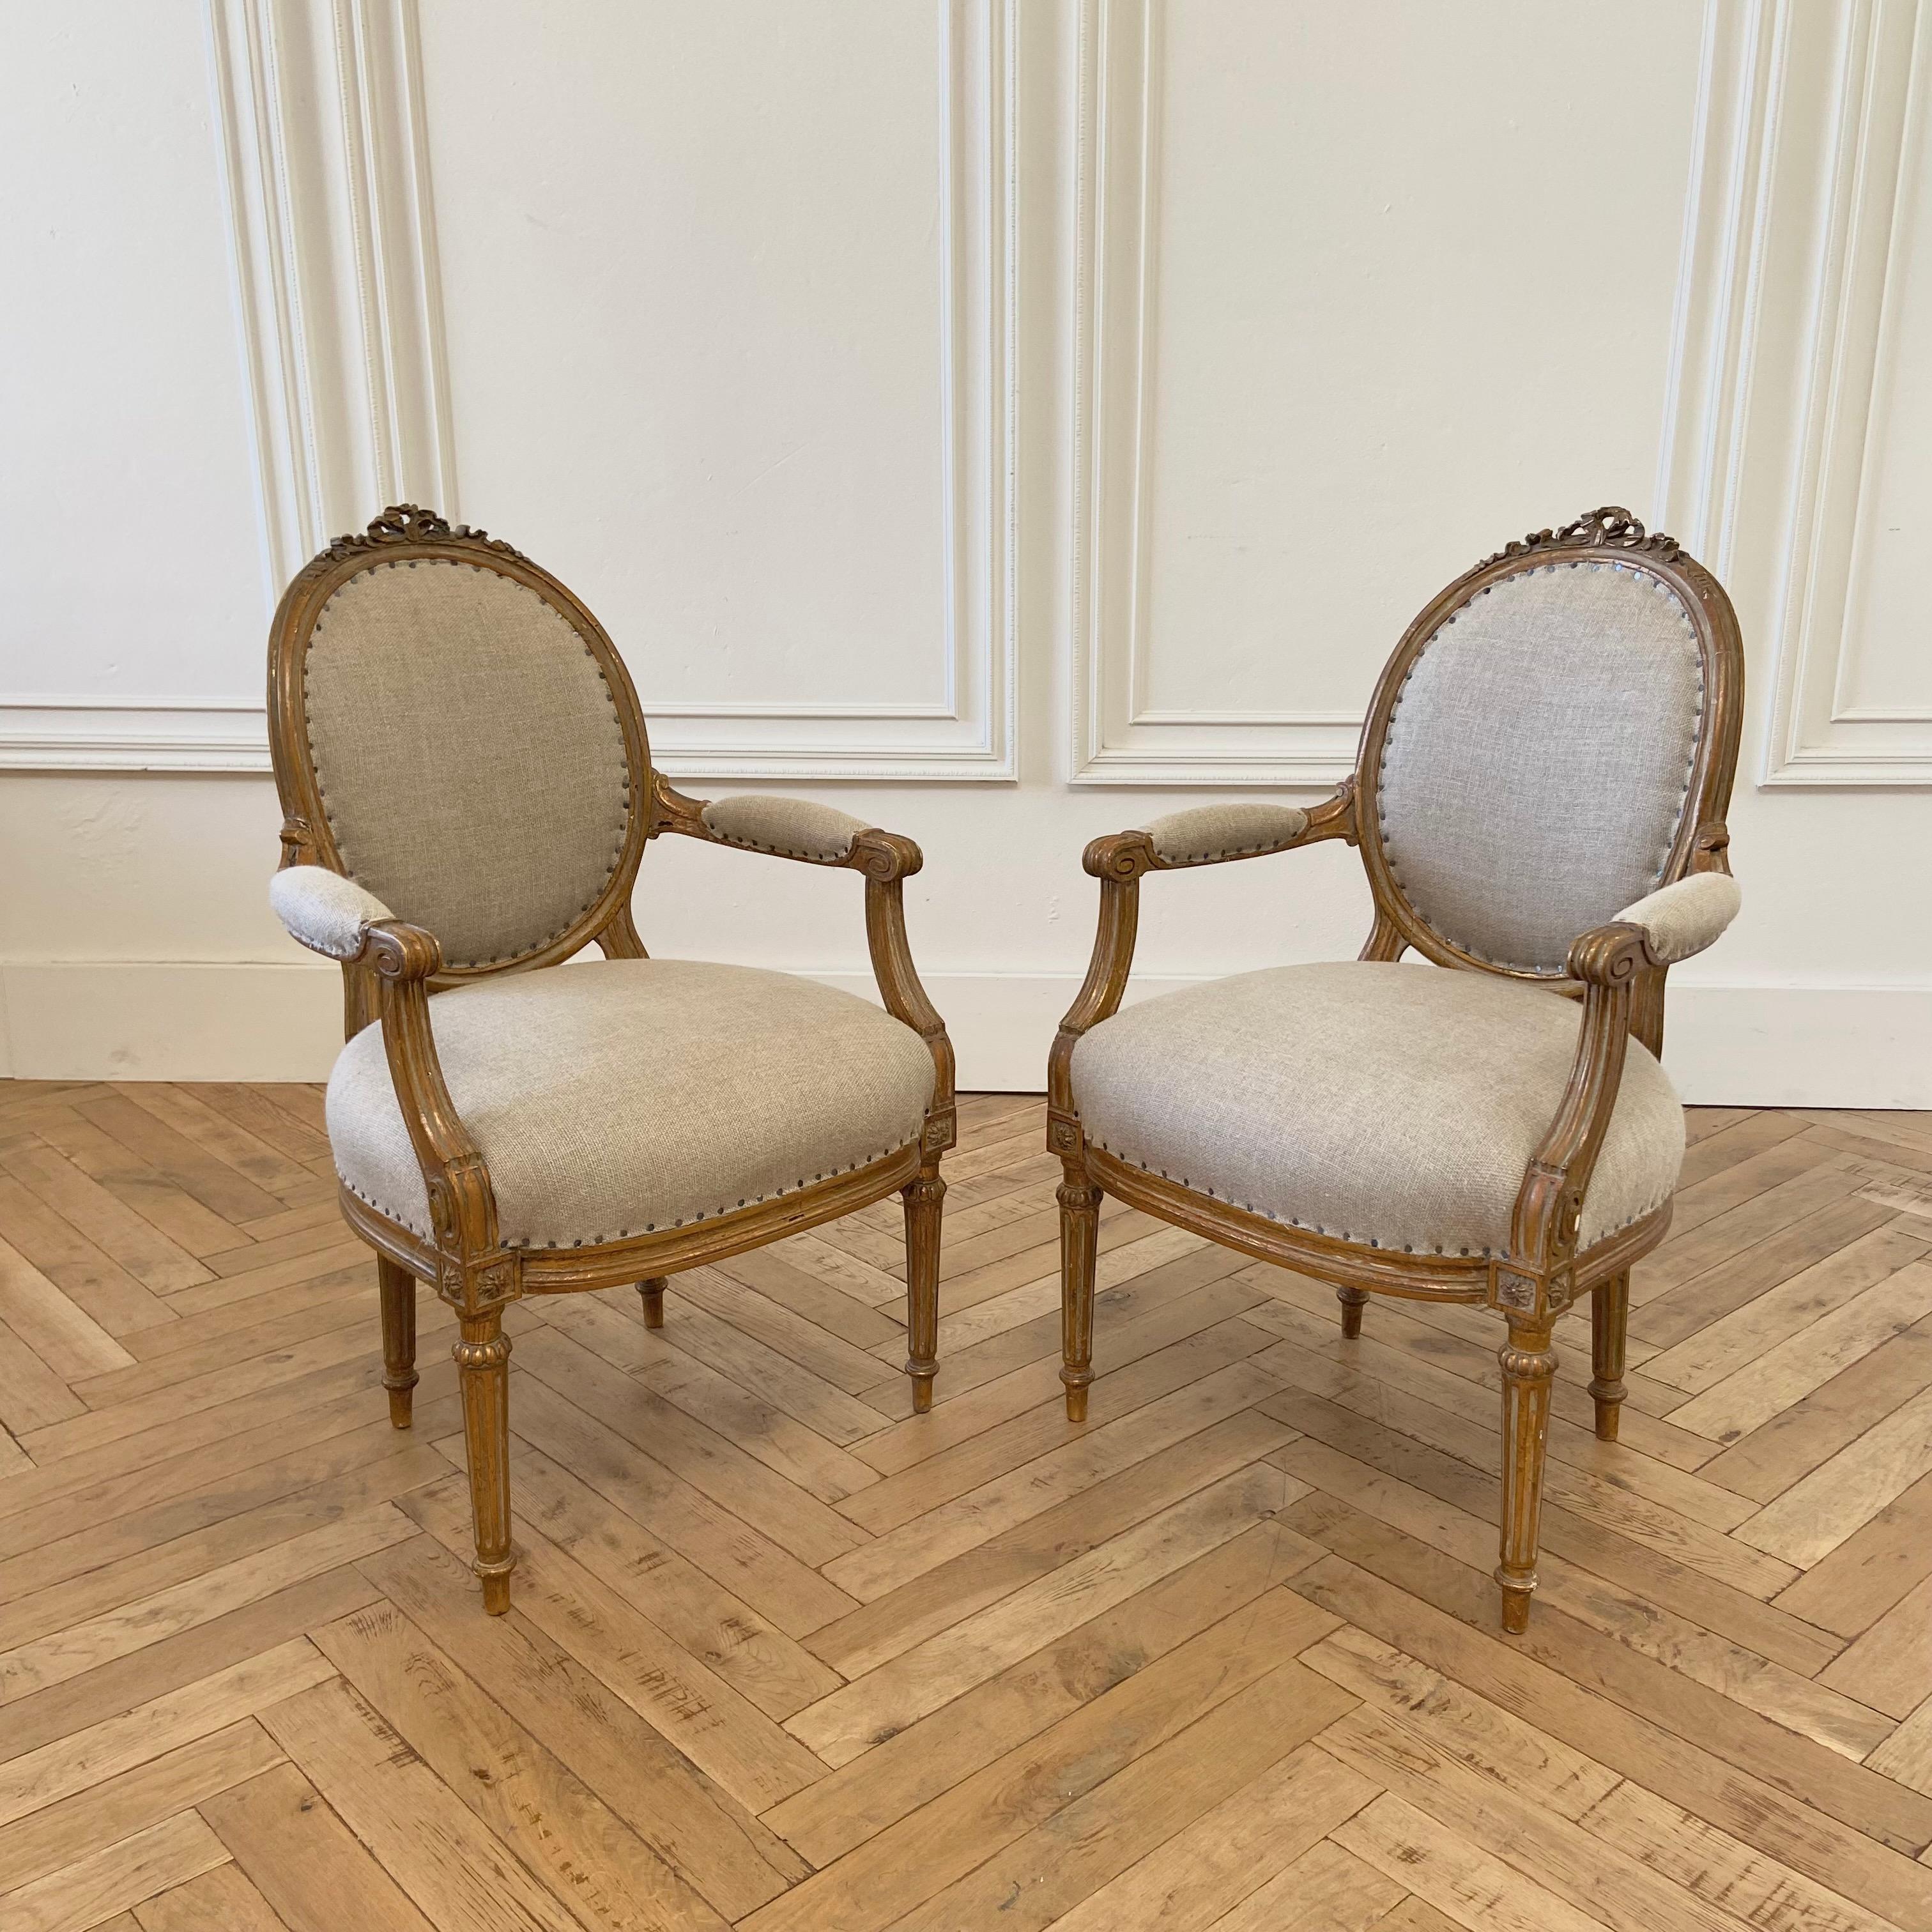 Antique Pair of Gilt Wood Open Arm Chairs Upholstered in Natural Linen In Good Condition For Sale In Brea, CA